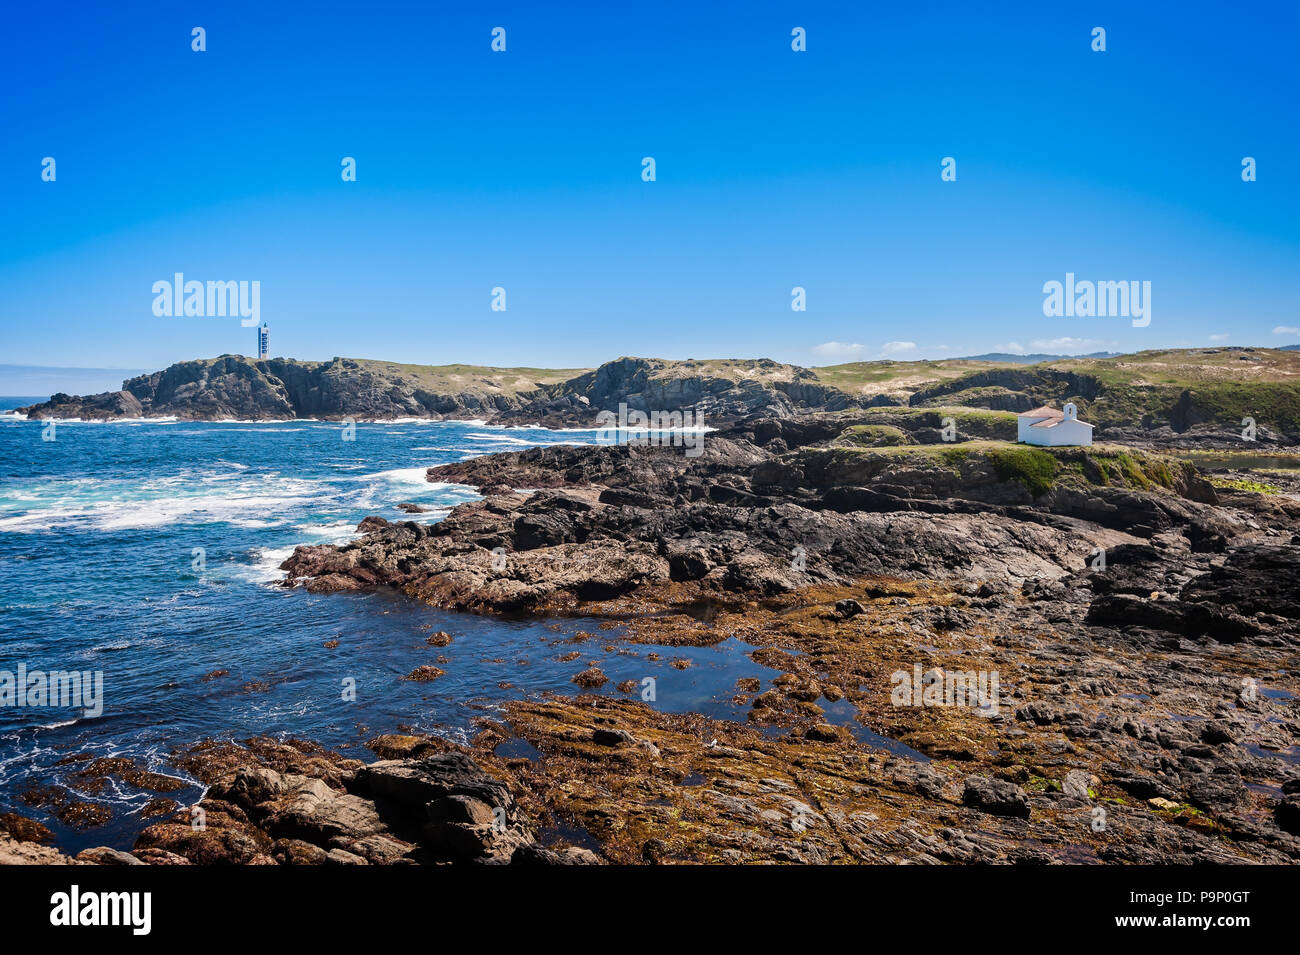 The hermitage of the Virgen del Puerto in Meirás, A Coruna, Galicia, Spain.Landscape of the coast of Galicia, lighthouse. Stock Photo